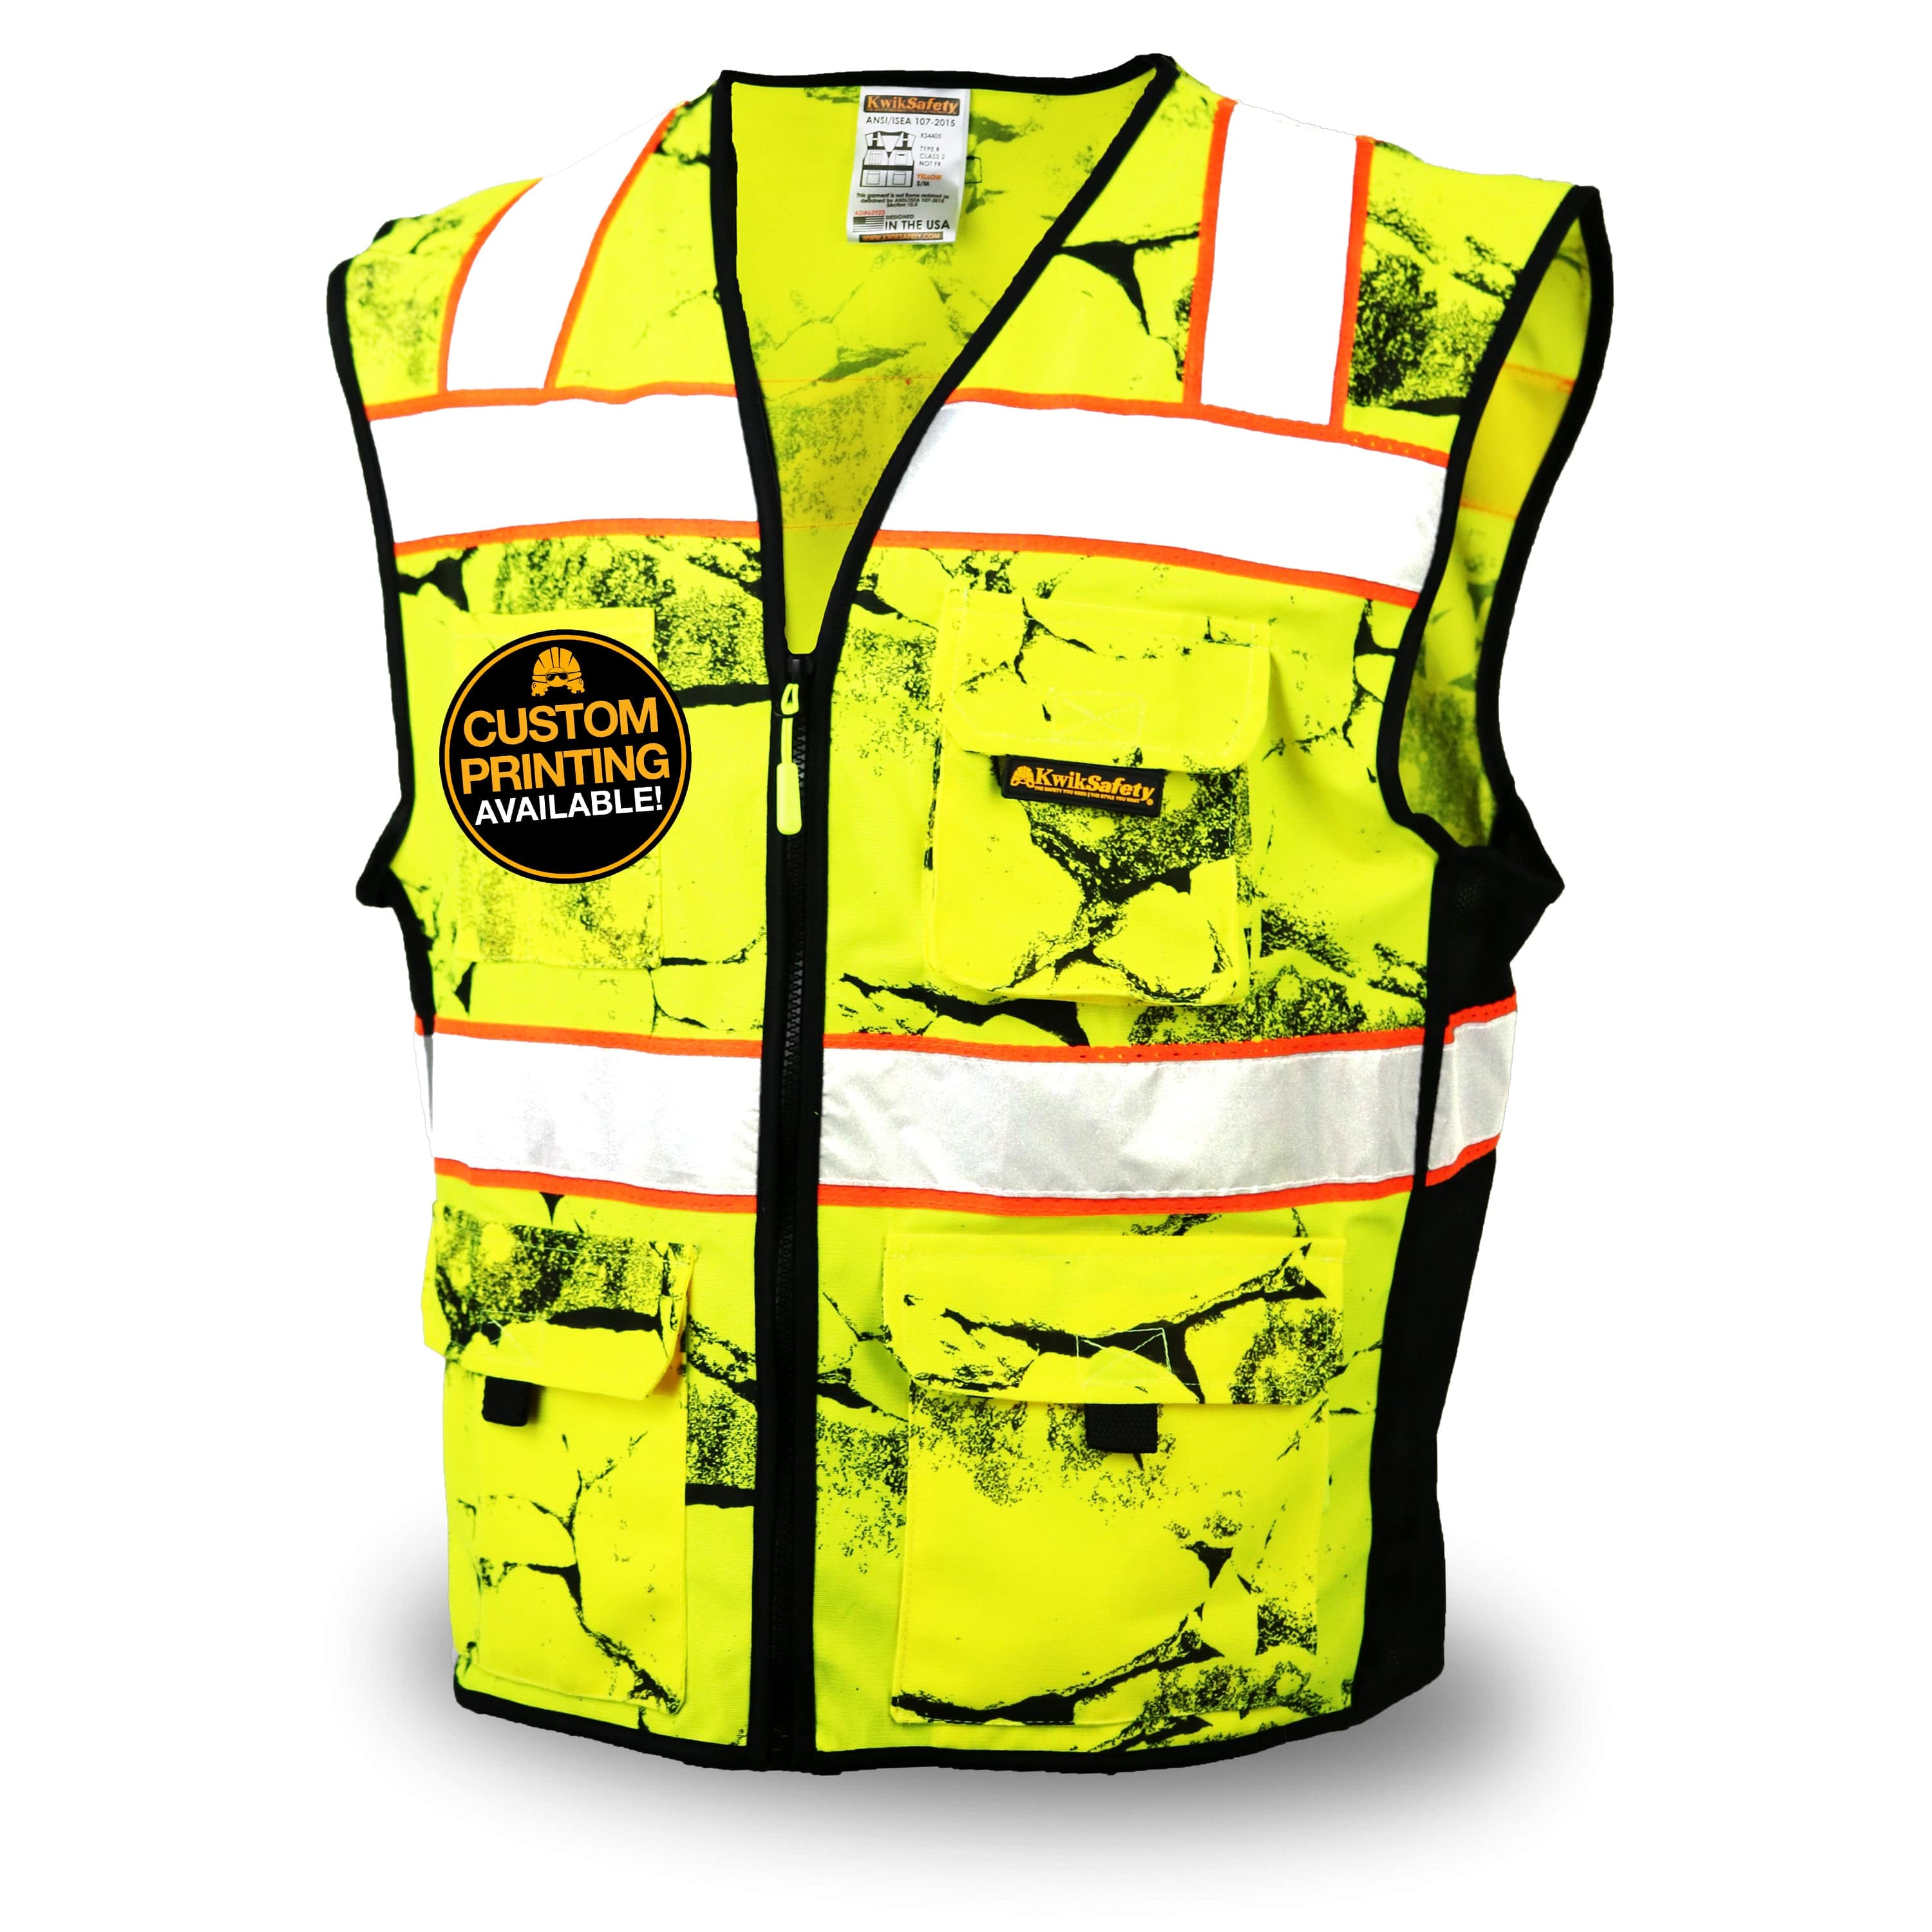 High Visibility Two Tone Safety Vest